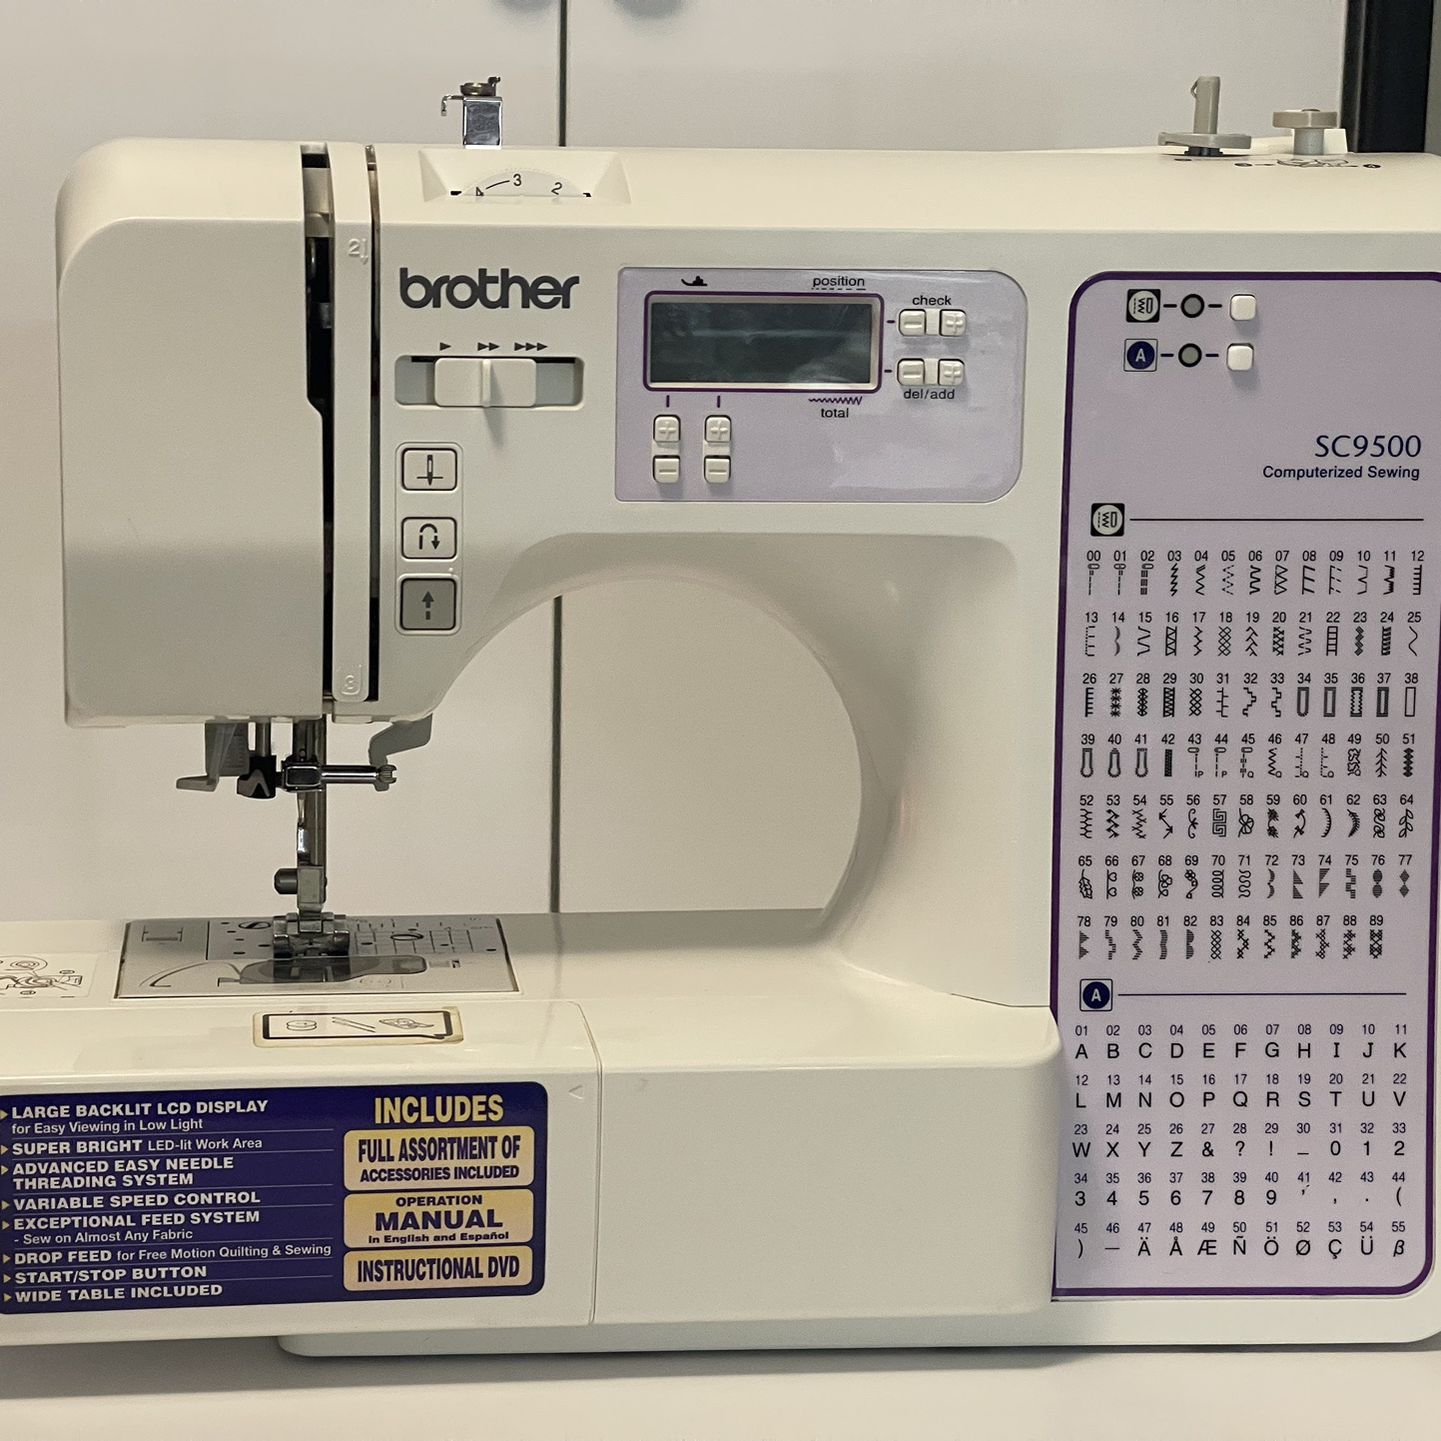 Brother SC9500 Computerized Sewing Machine